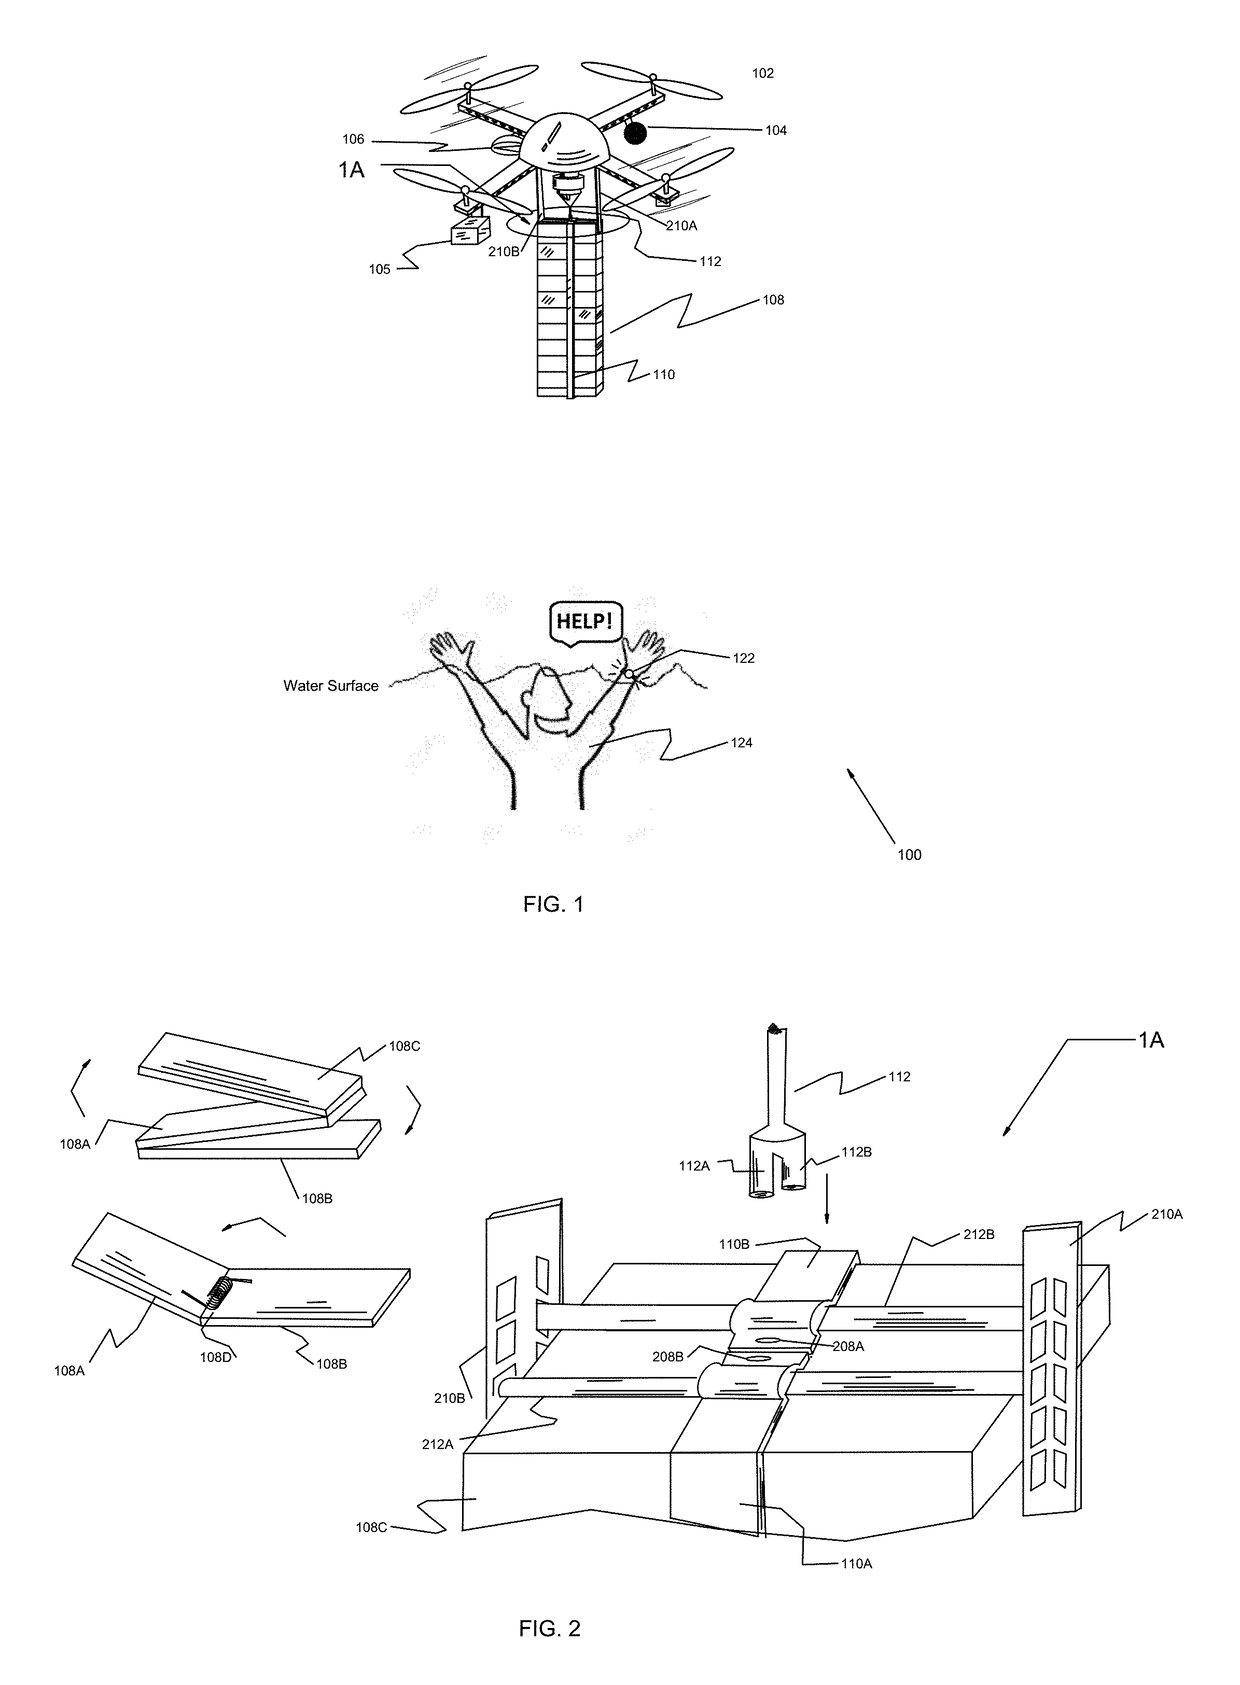 Unmanned aerial vehicle system and methods for use